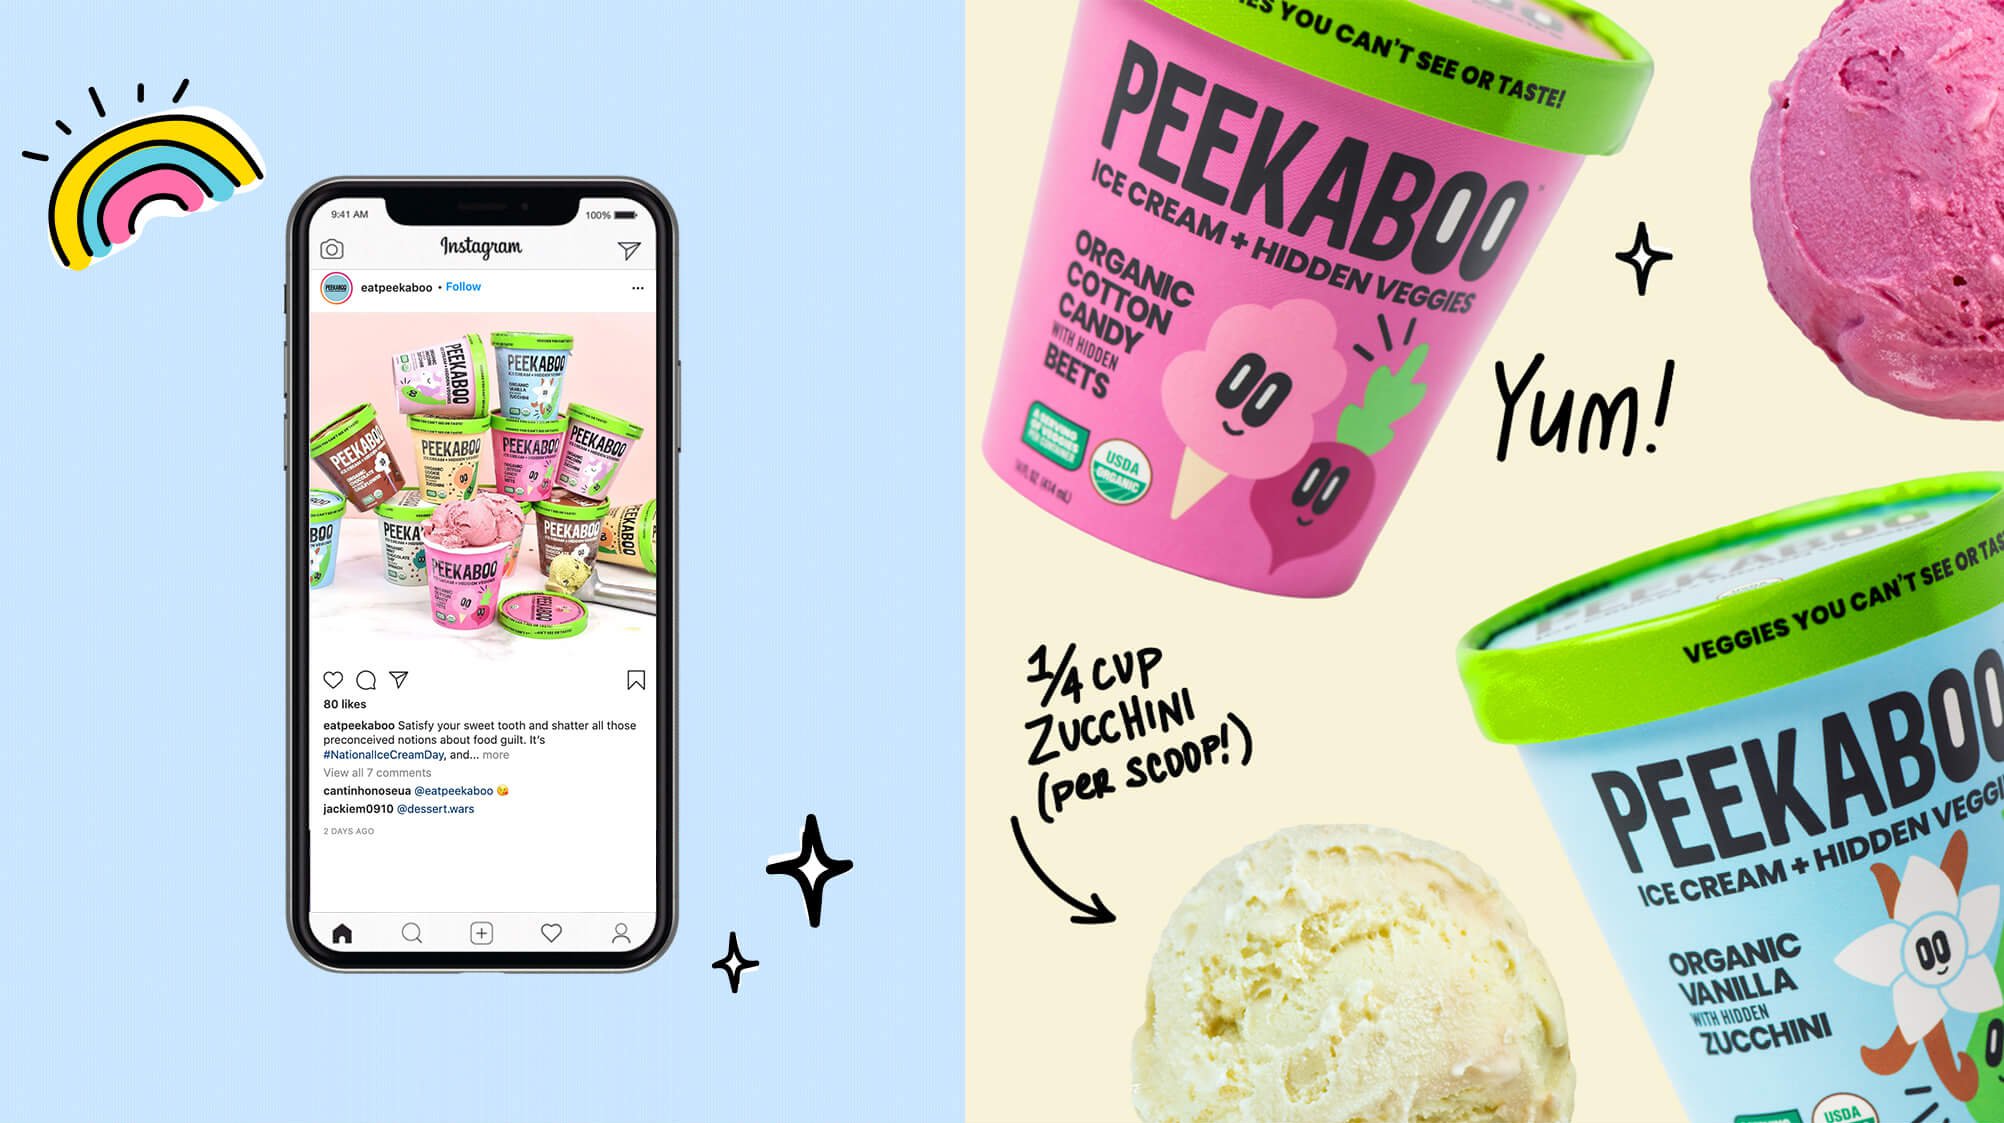 Jacober rebranding of Peekaboo Ice Cream. Photo of a social media post displayed on mobile device and a single graphic to the right